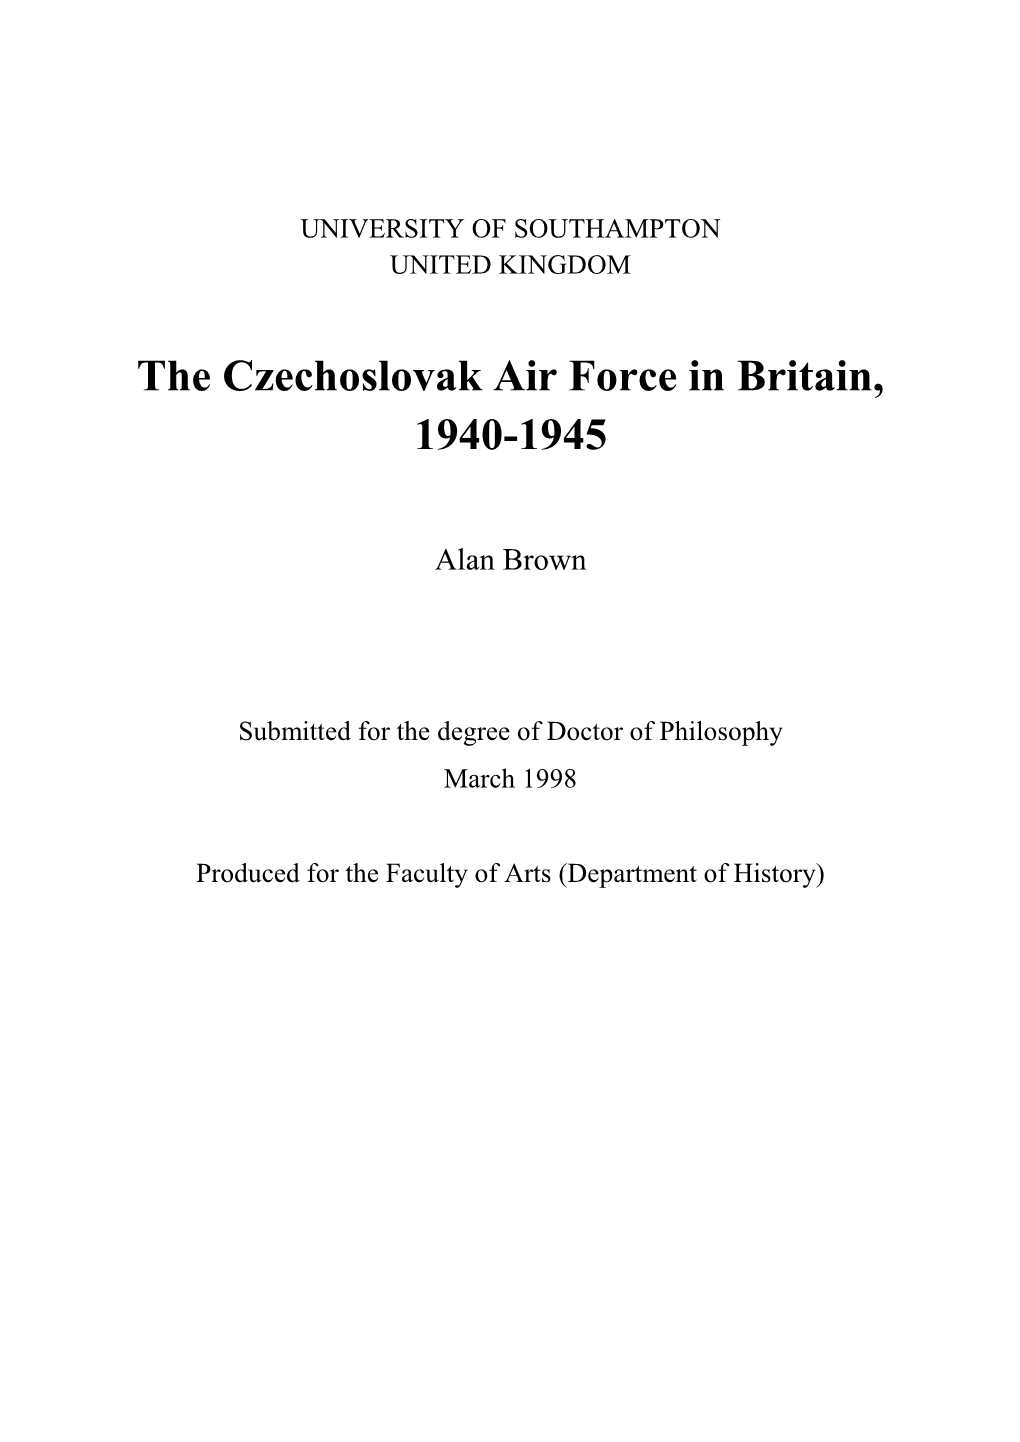 The Czechoslovak Air Force in Britain, 1940-1945